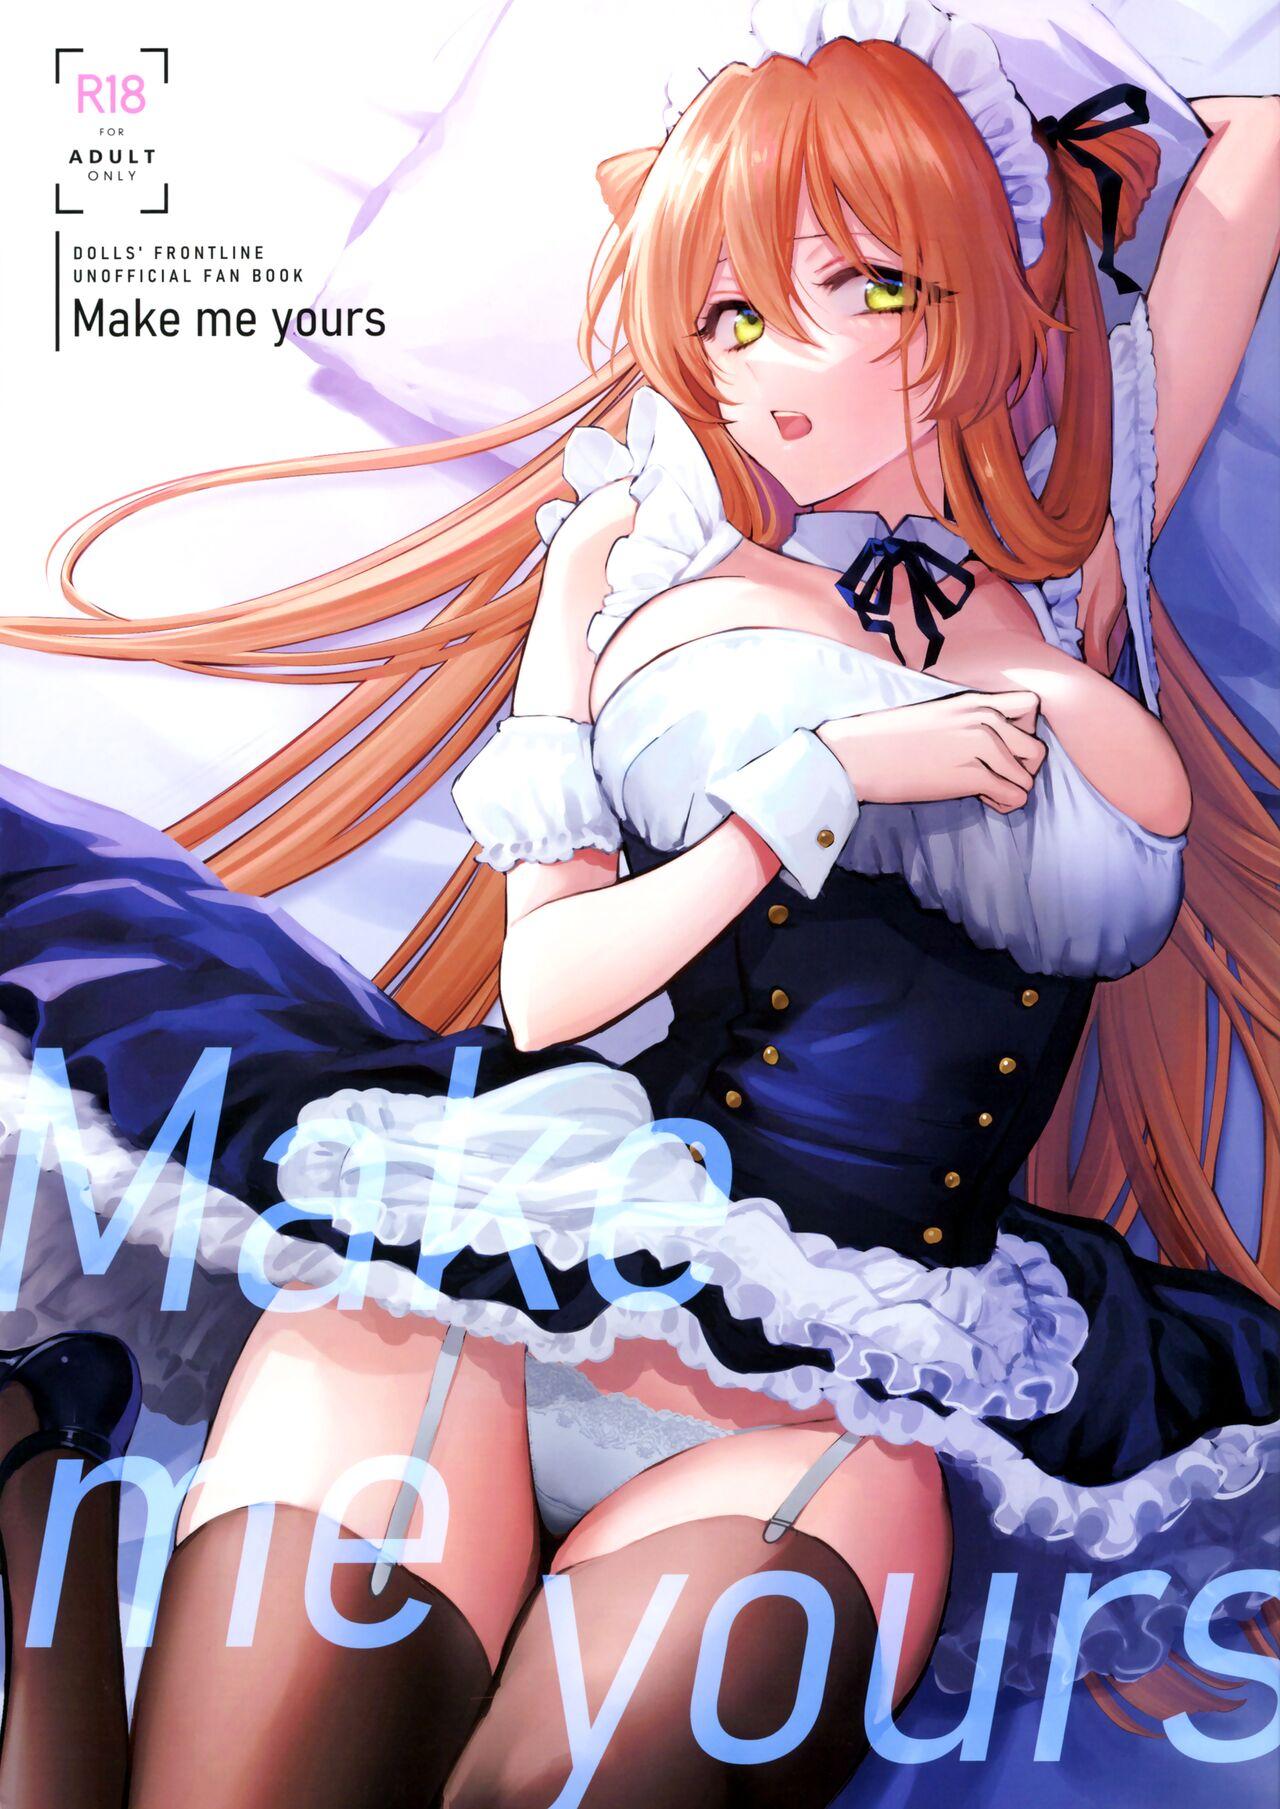 Big Butt Make me Yours - Girls frontline Teensnow - Picture 1